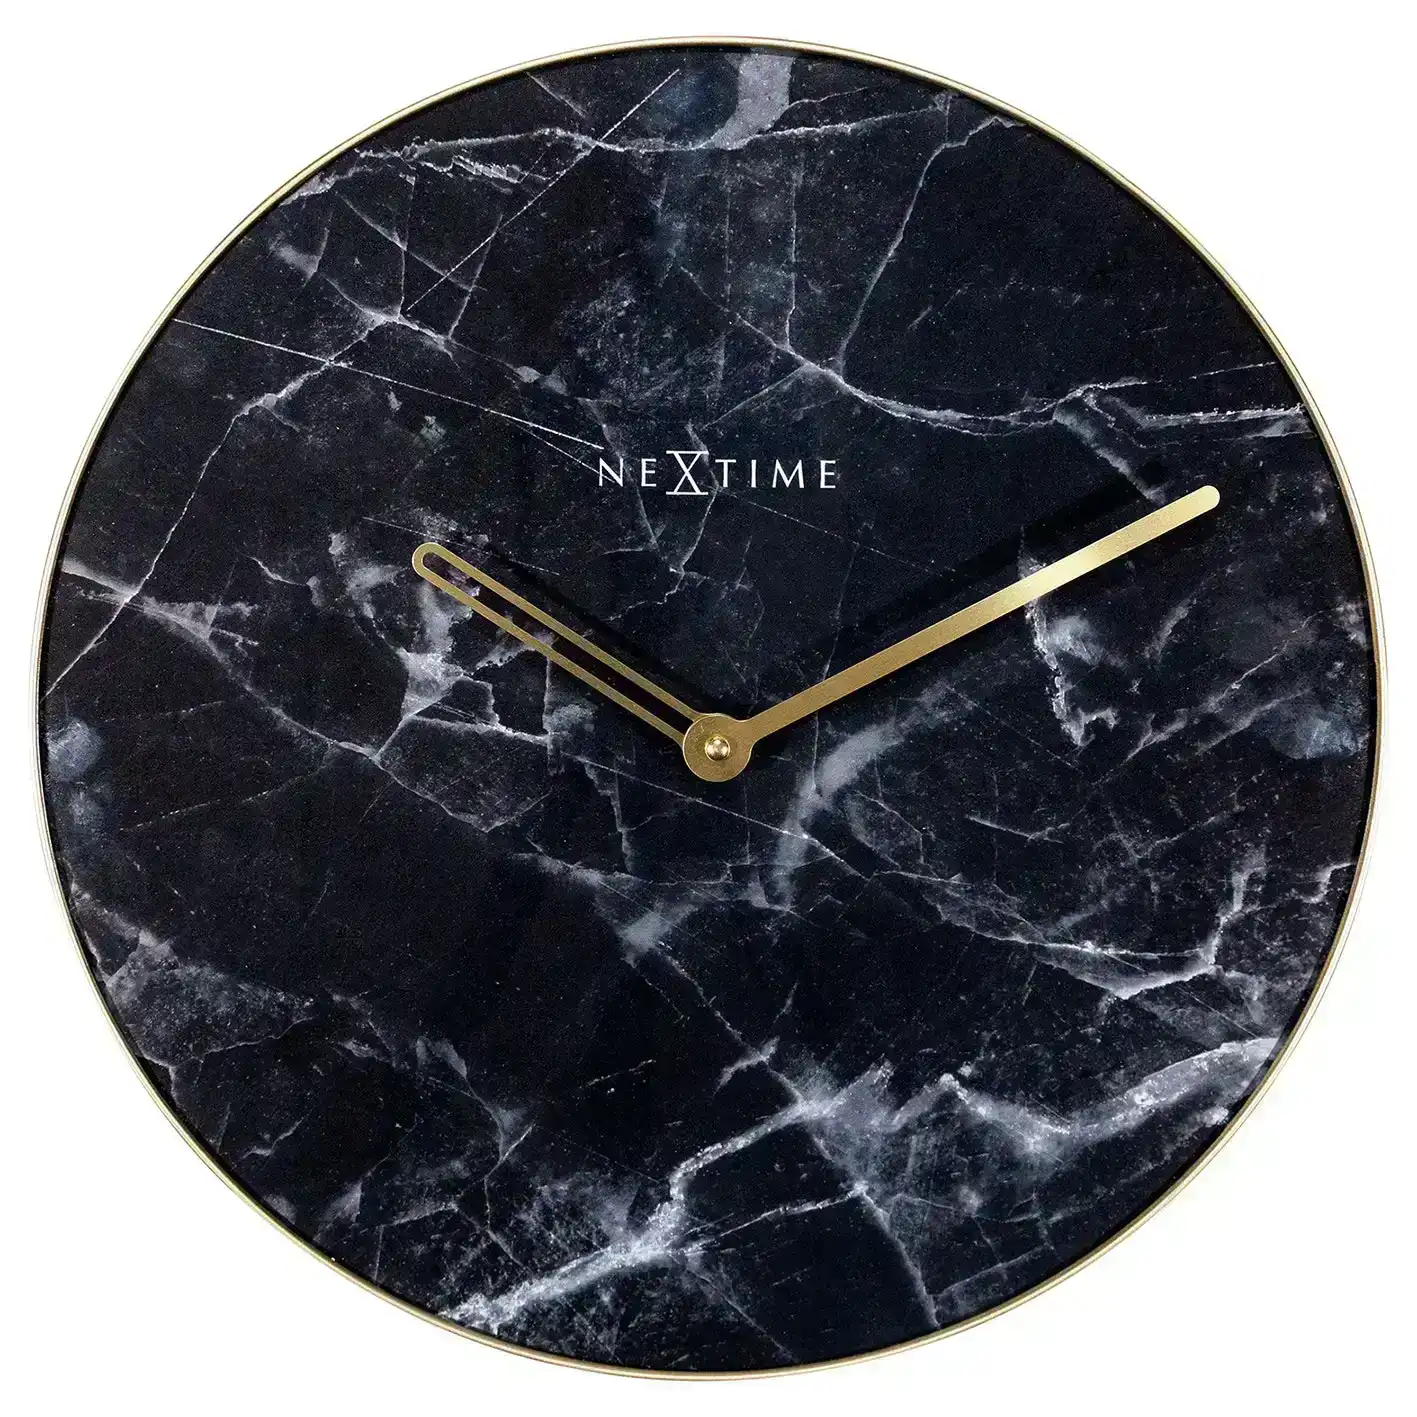 NeXtime 40cm Marble Silent Analogue Round Wall Clock Home/Office Decor Black